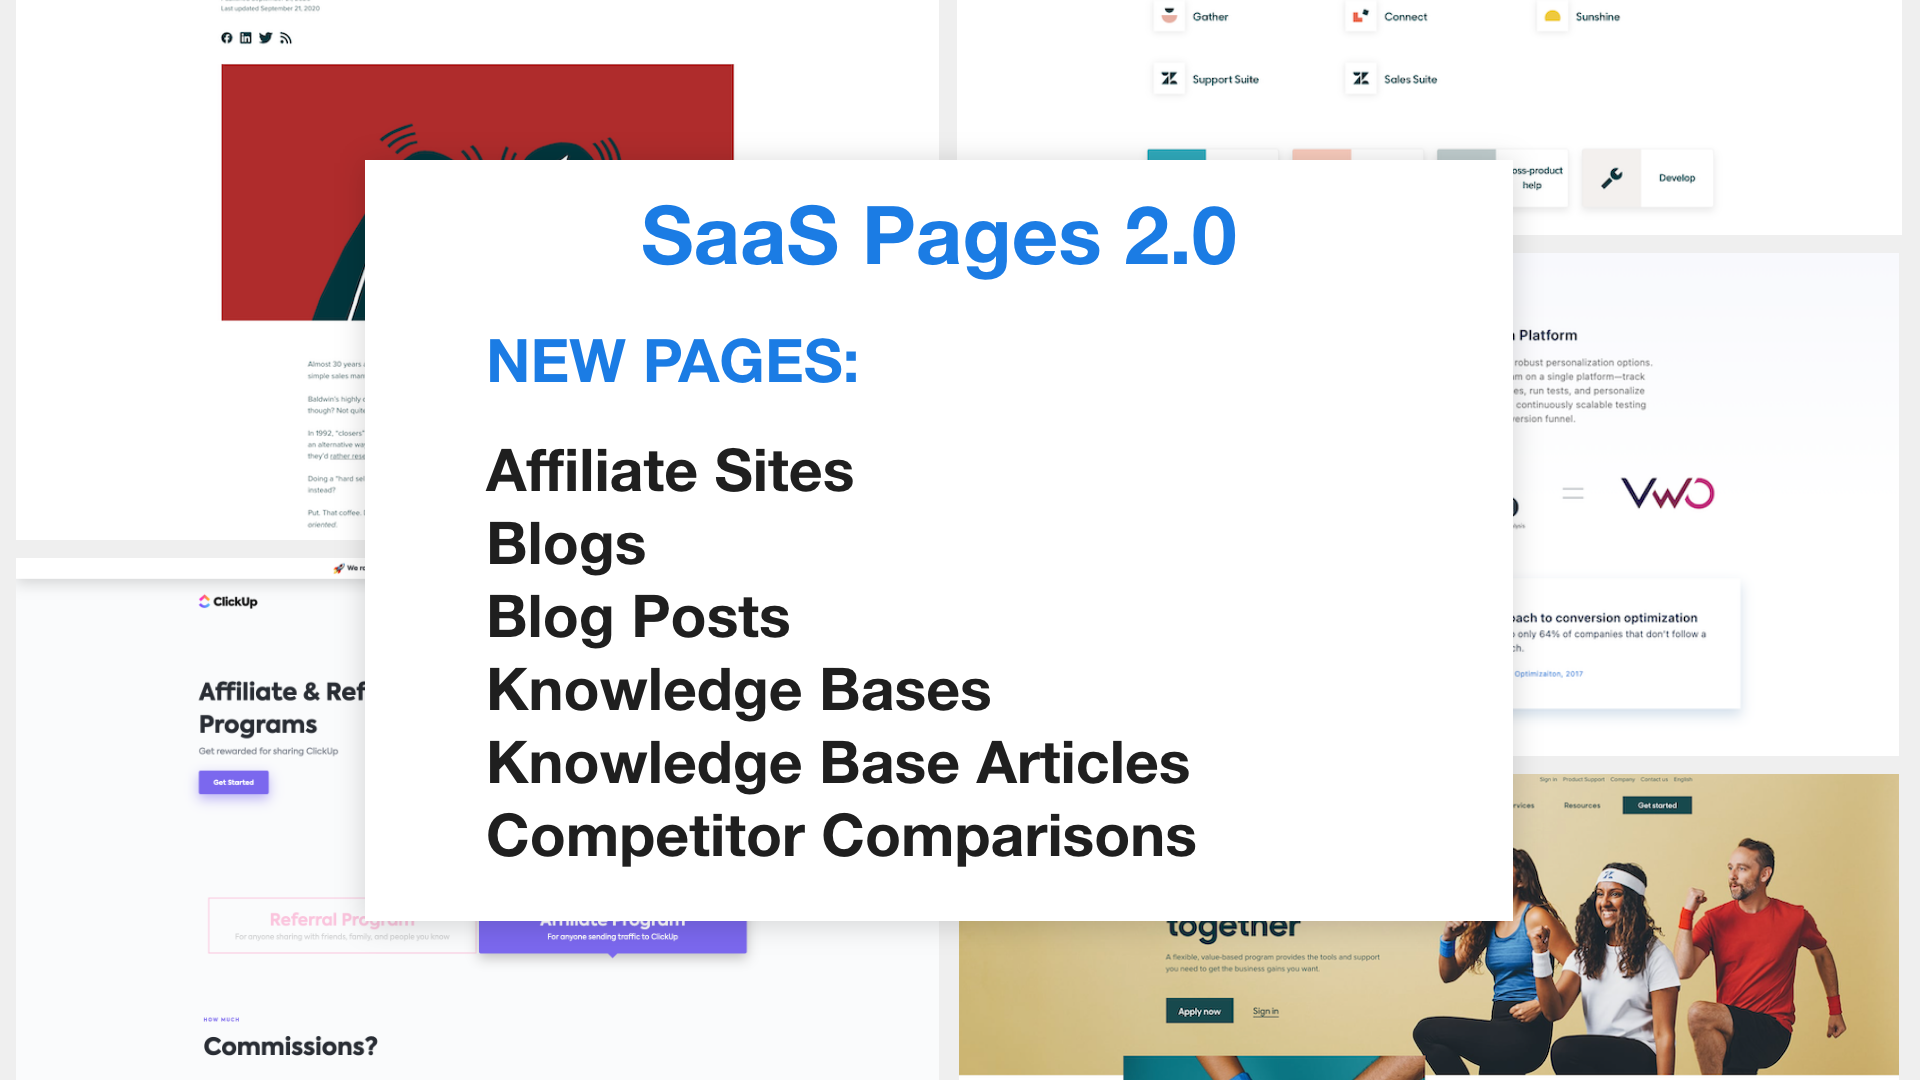 SaaS Pages 2.0 Product Hunt Image